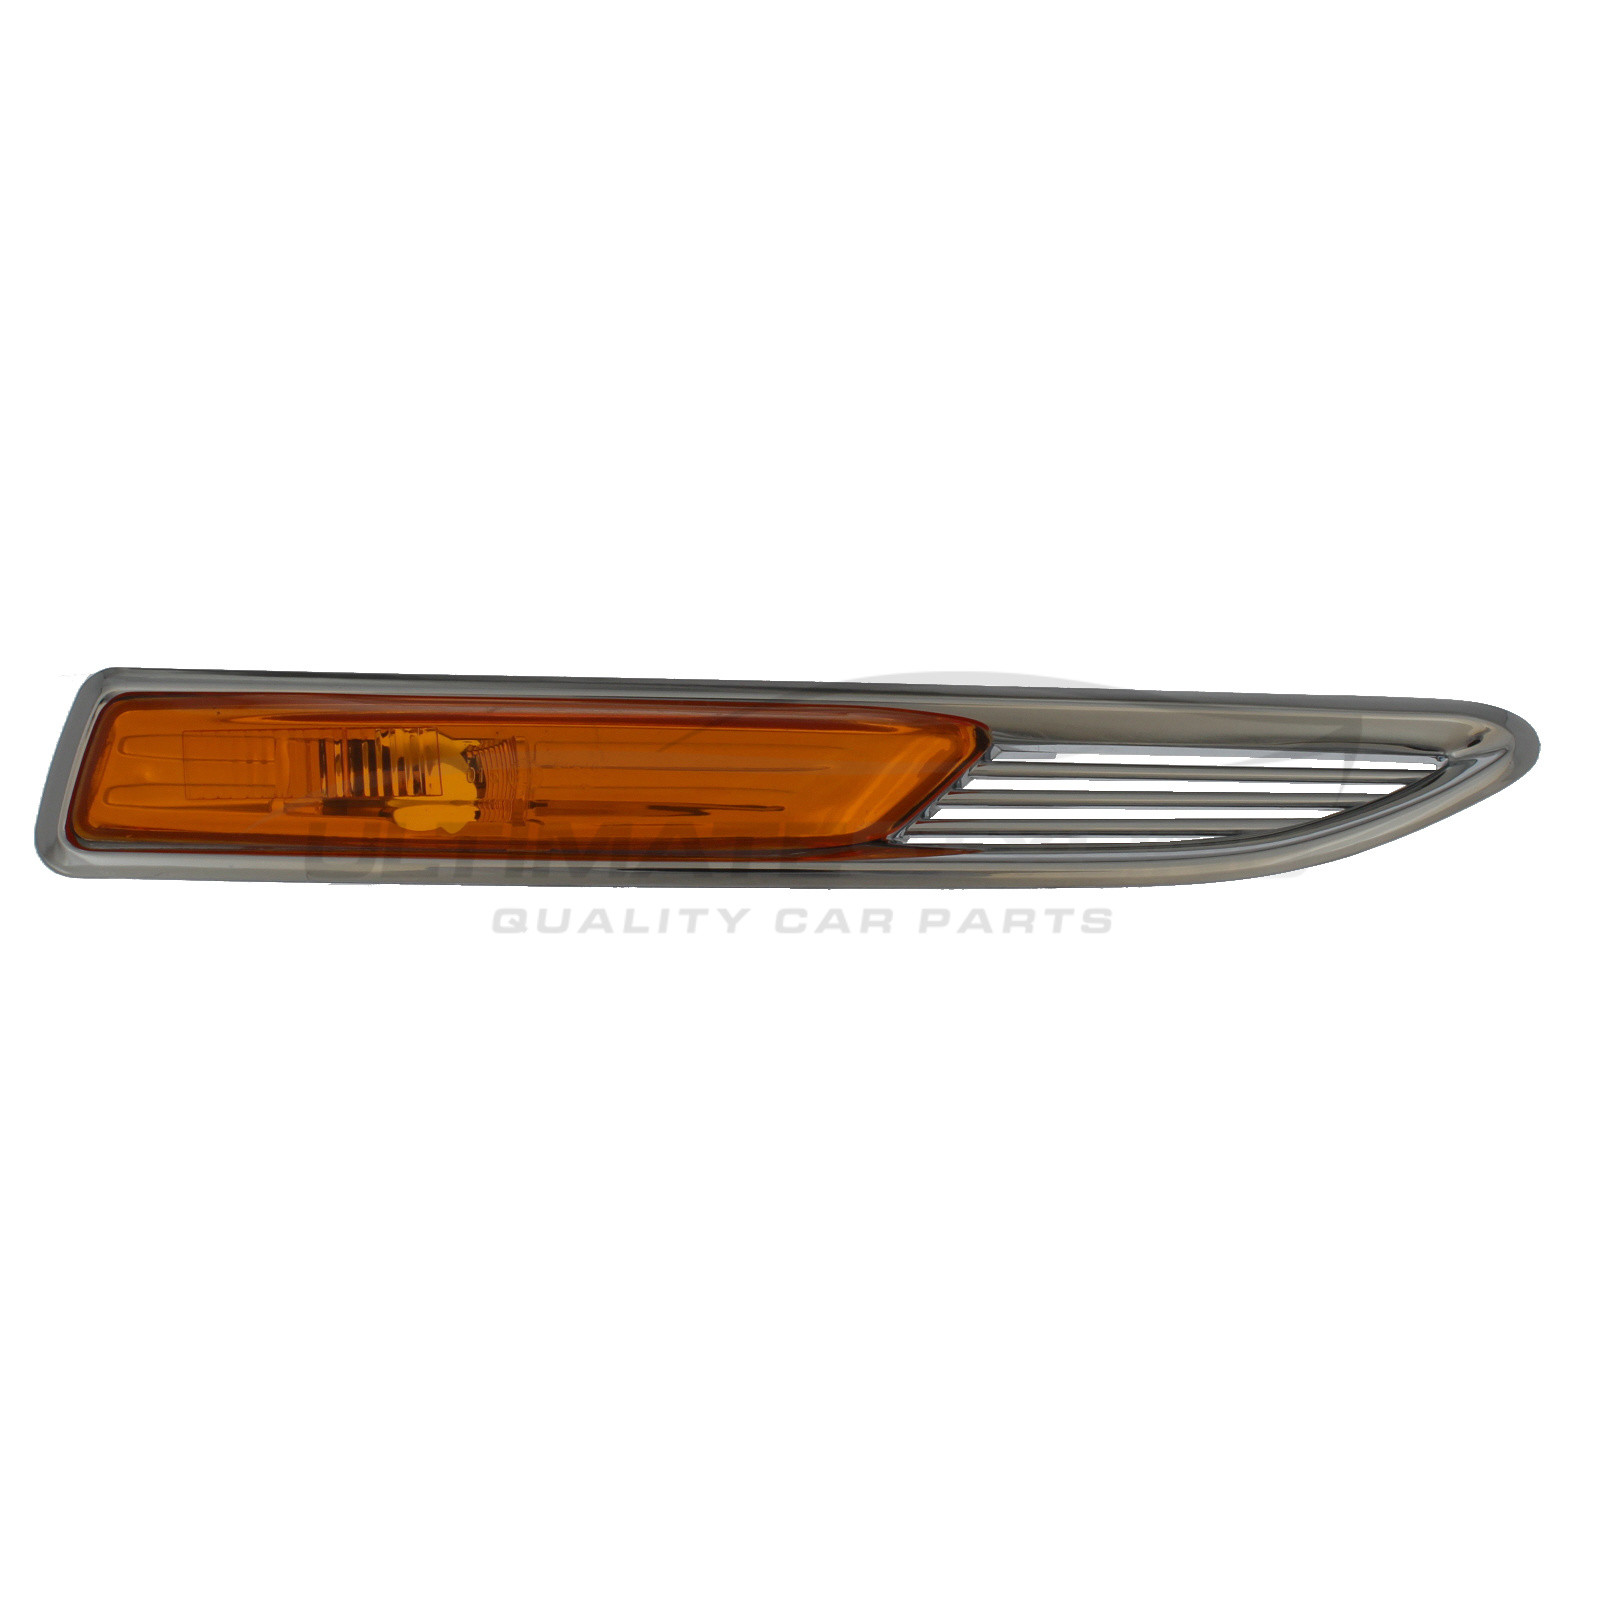 Ford Mondeo Side Repeater - Drivers Side (RH) - Amber lens - Non-LED